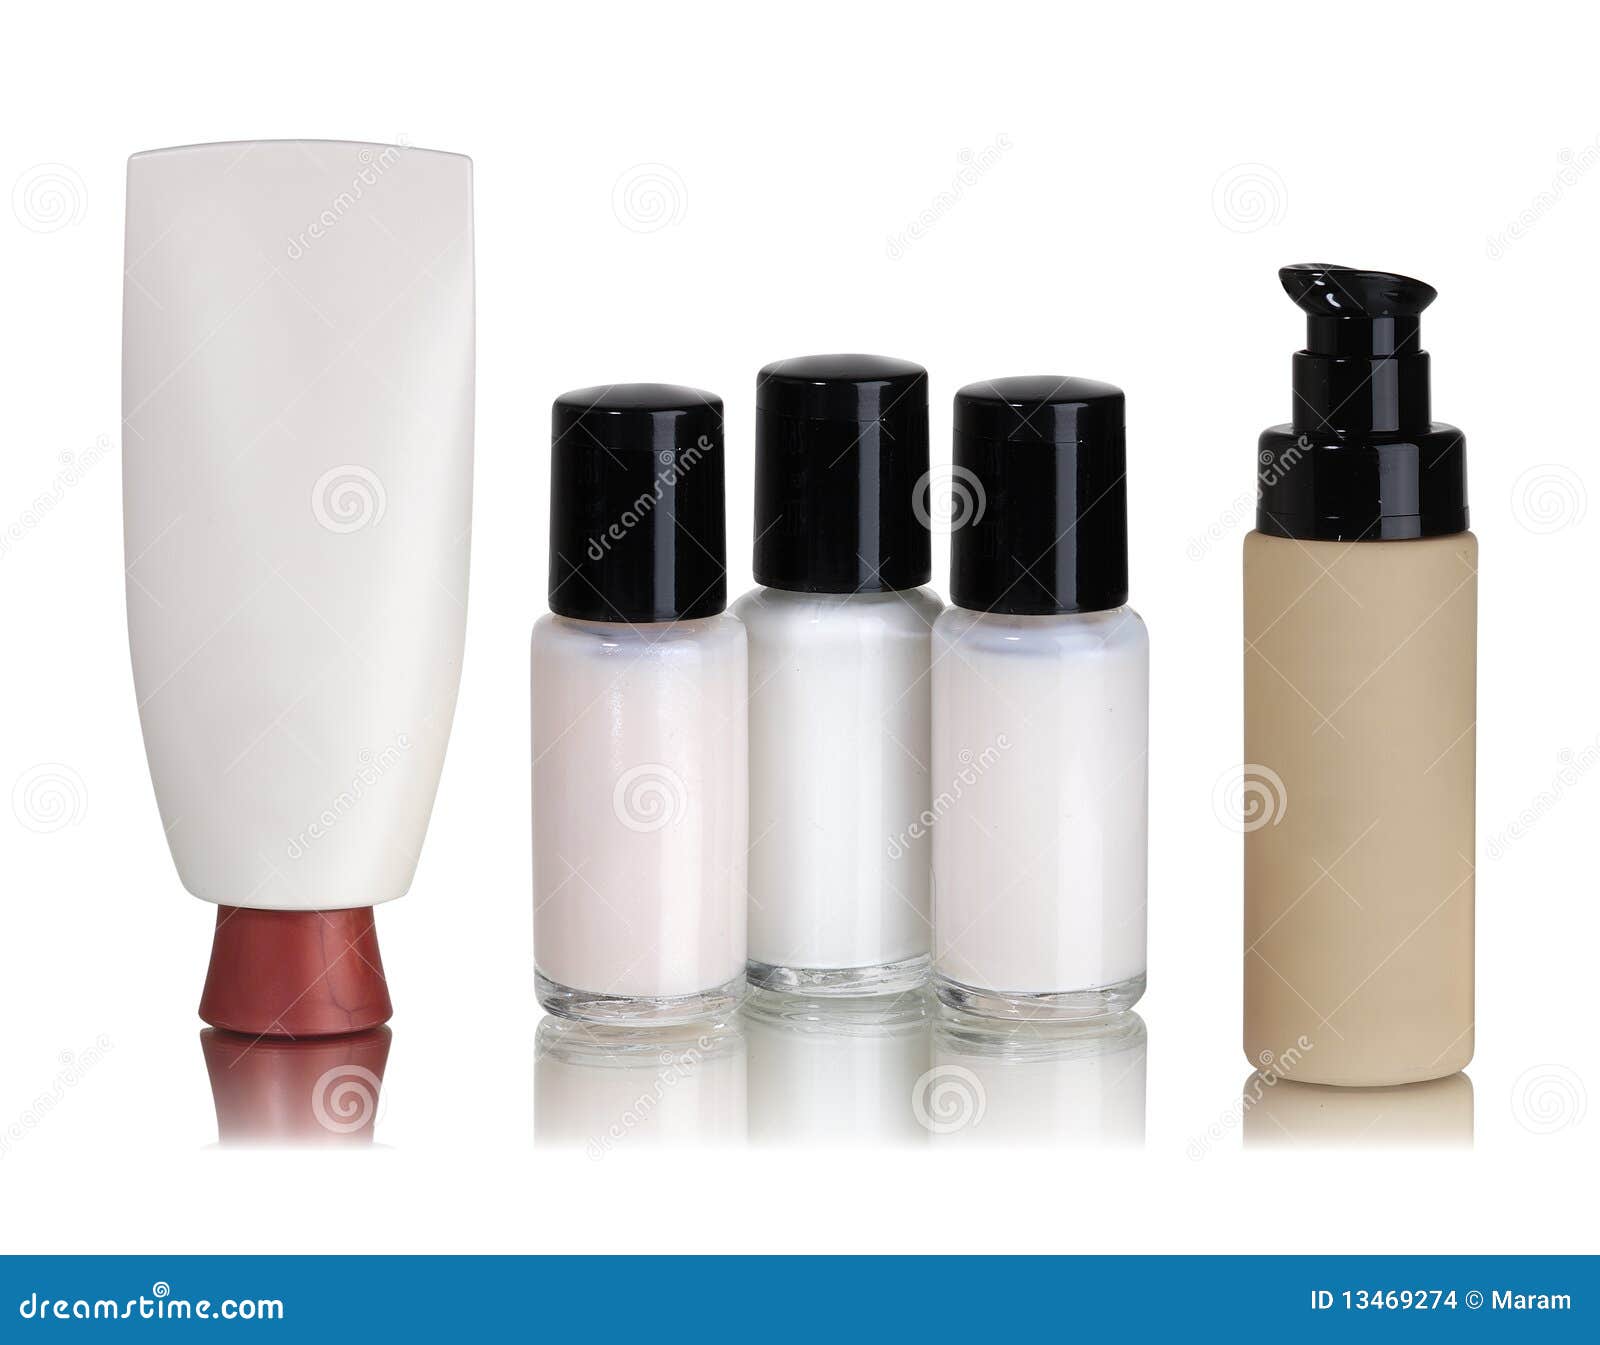 Cosmetics containers stock images - image: 13469274.